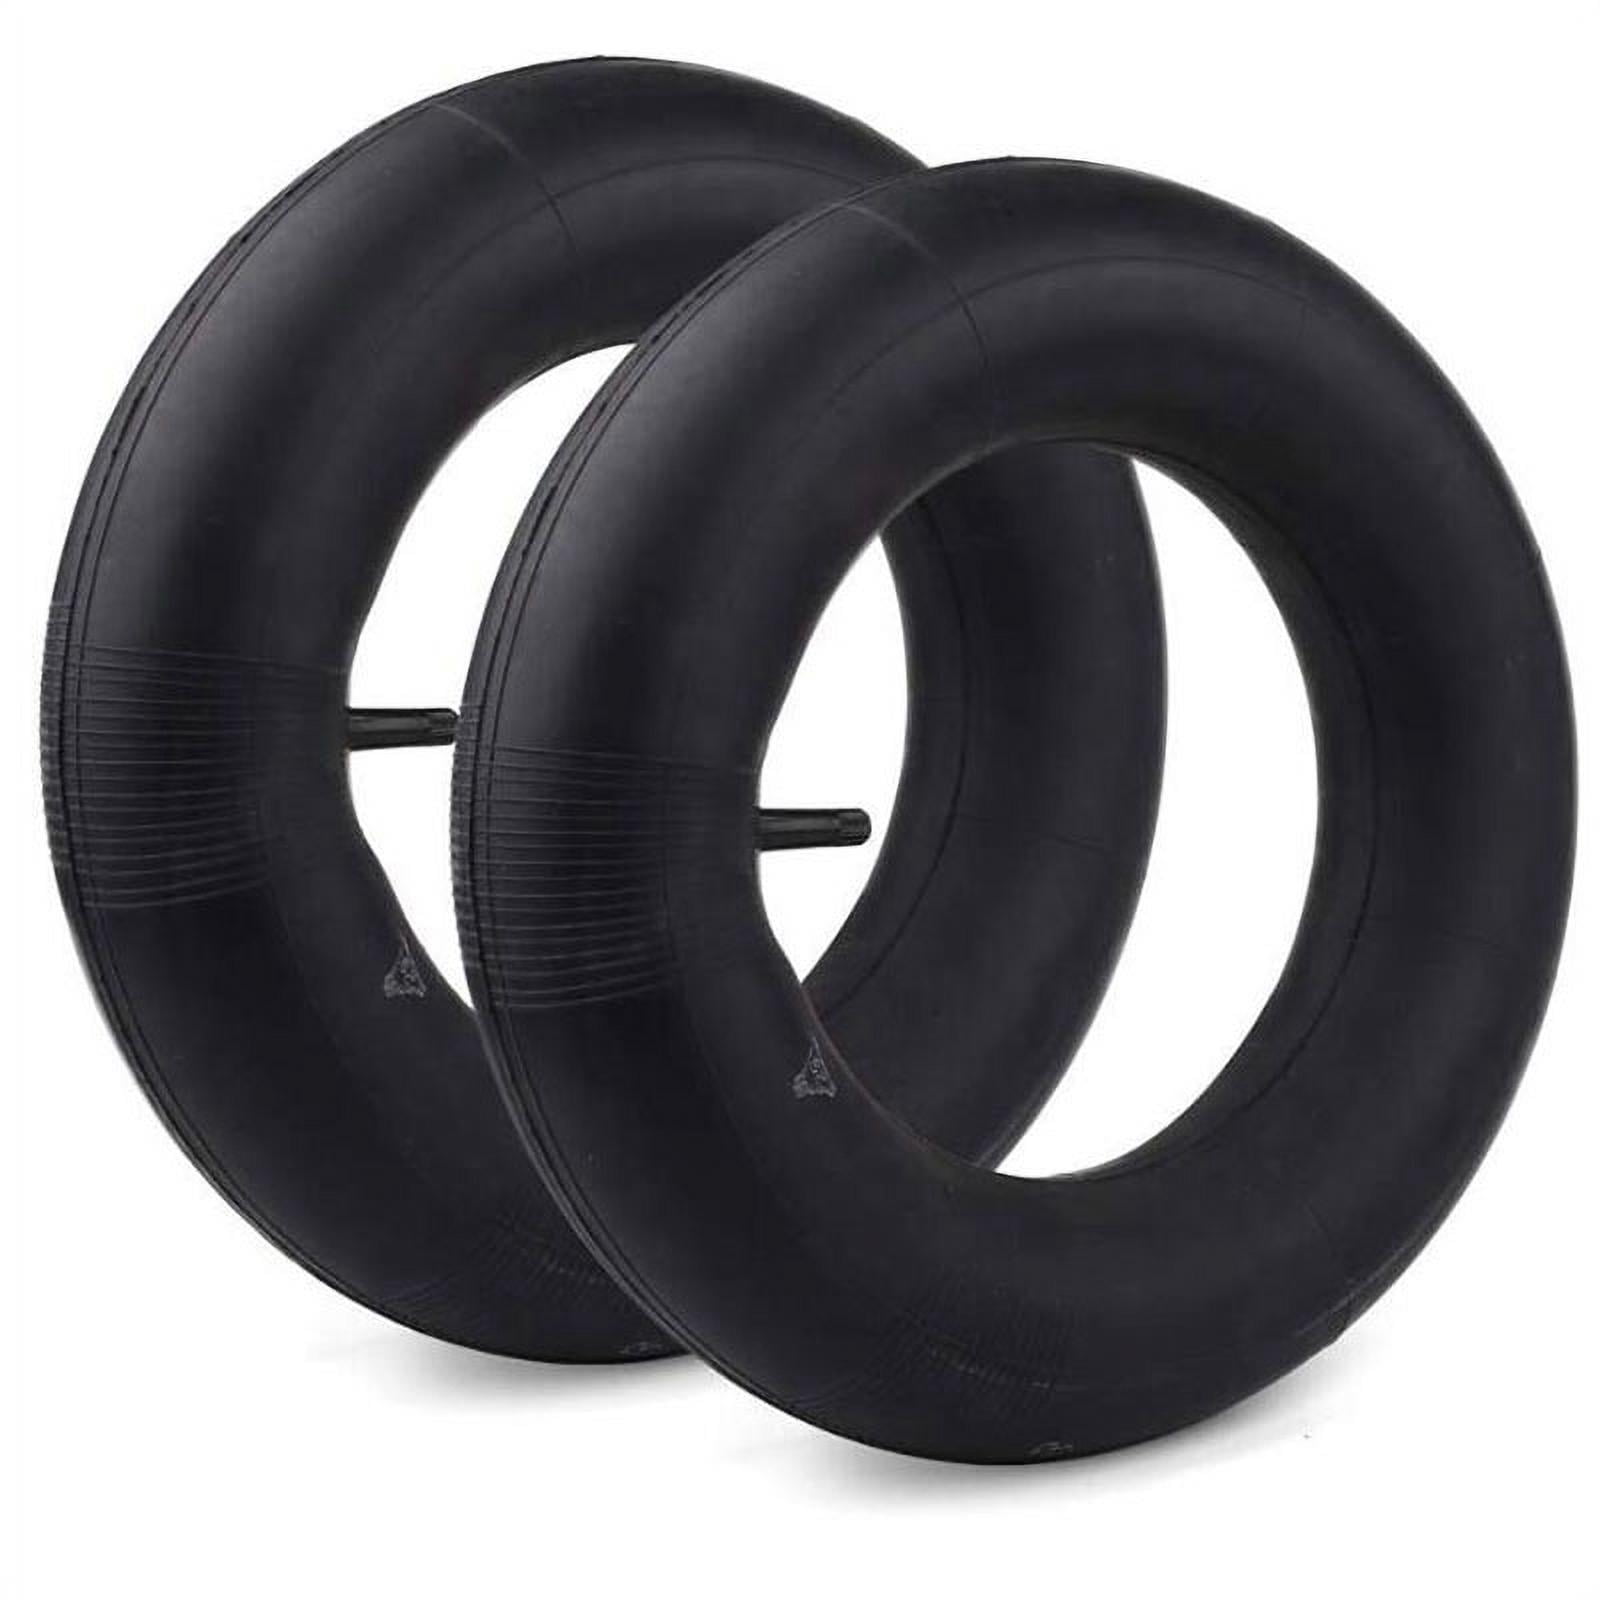 Two 15X6.00-6 Lawn Tire Inner Tube 15X6X6 TR13 Lawn Mower Tractor Tire 